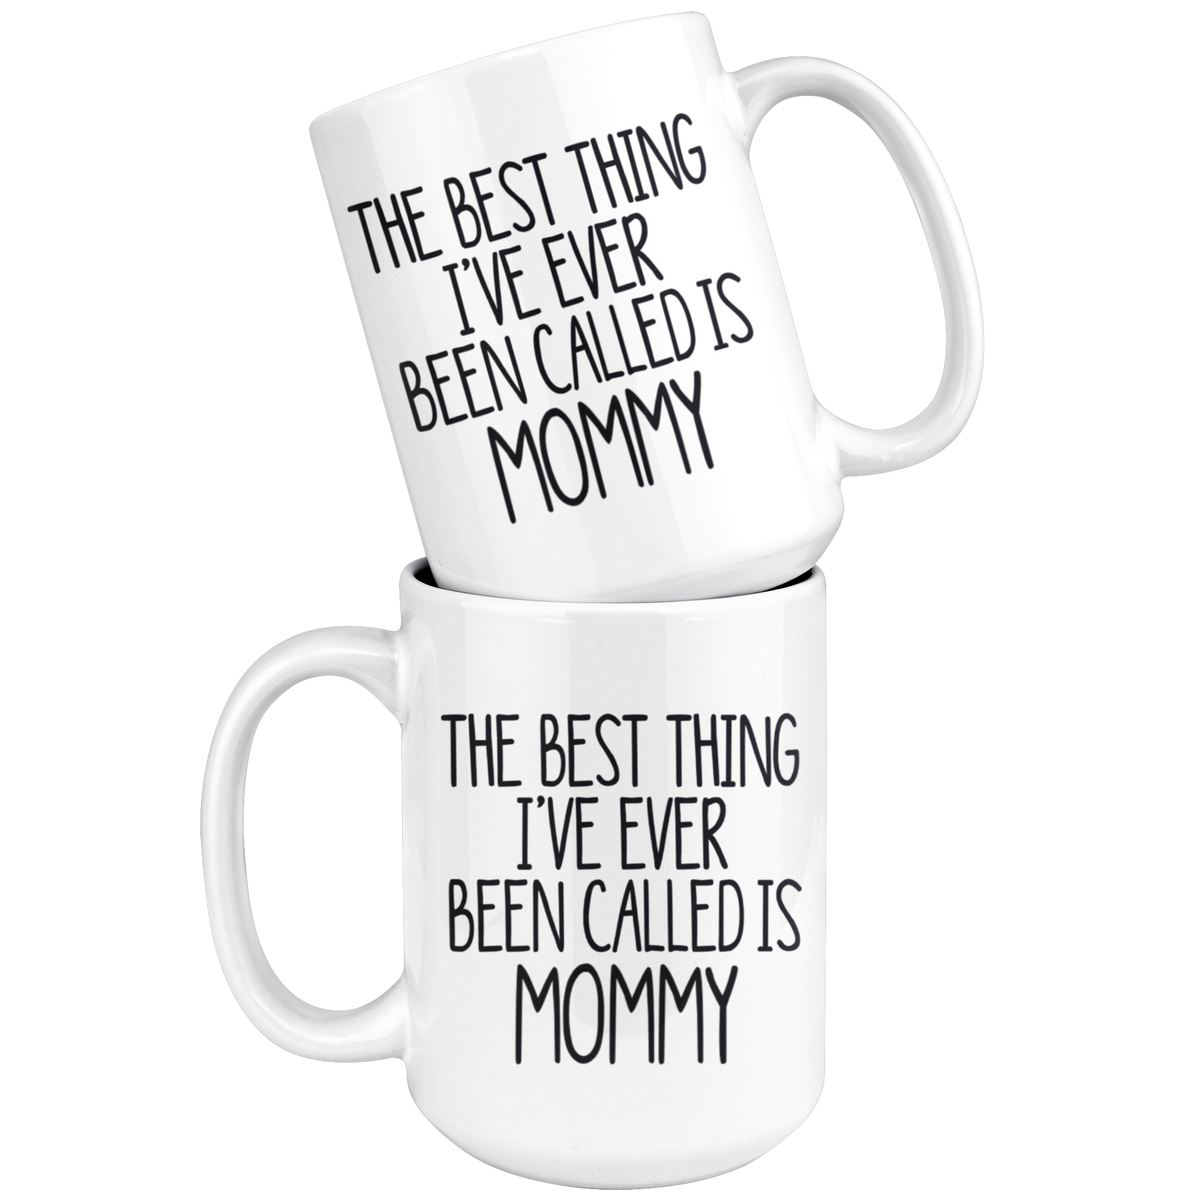 Mommy Gift Mug The Best Thing I've Ever Been Called is Mommy